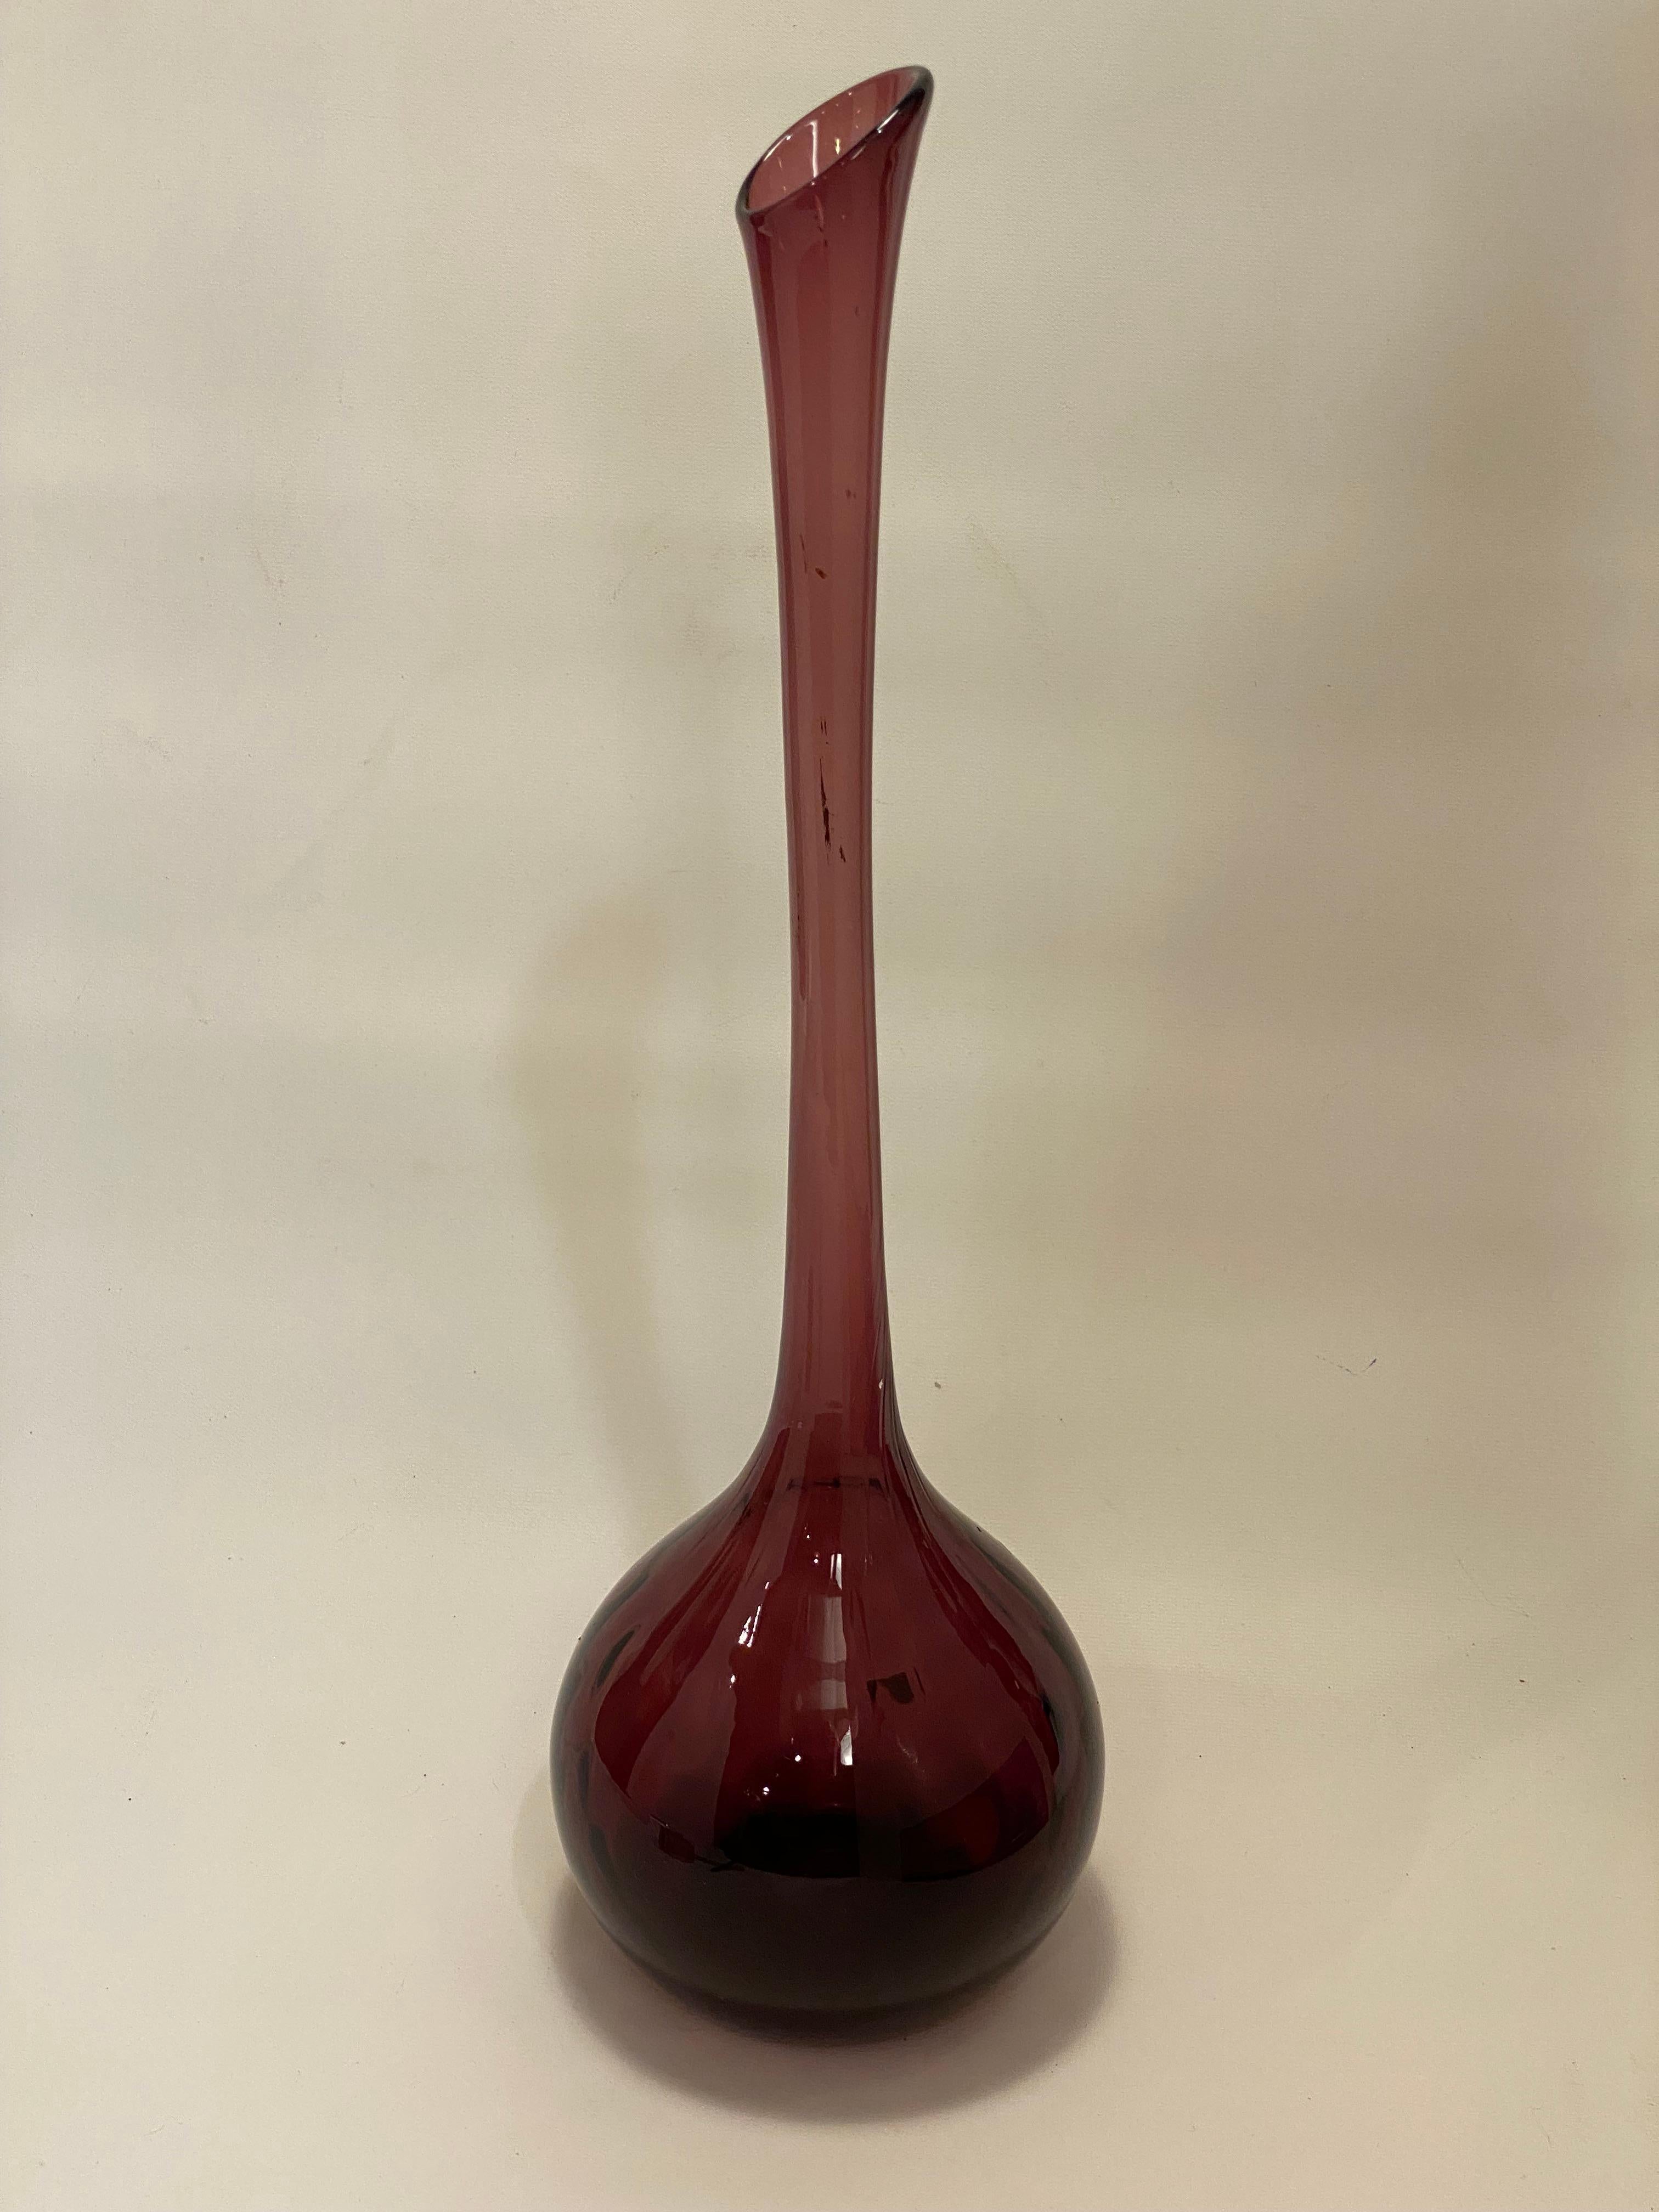 Tall and elegant Empoli blown glass vase. Interior quilted pattern bulbous base with a long flared neck and mouth. Deep purple color with polished bottom. Circa 1960-70. Partial intact label. Good overall condition with no visible chips or cracks.